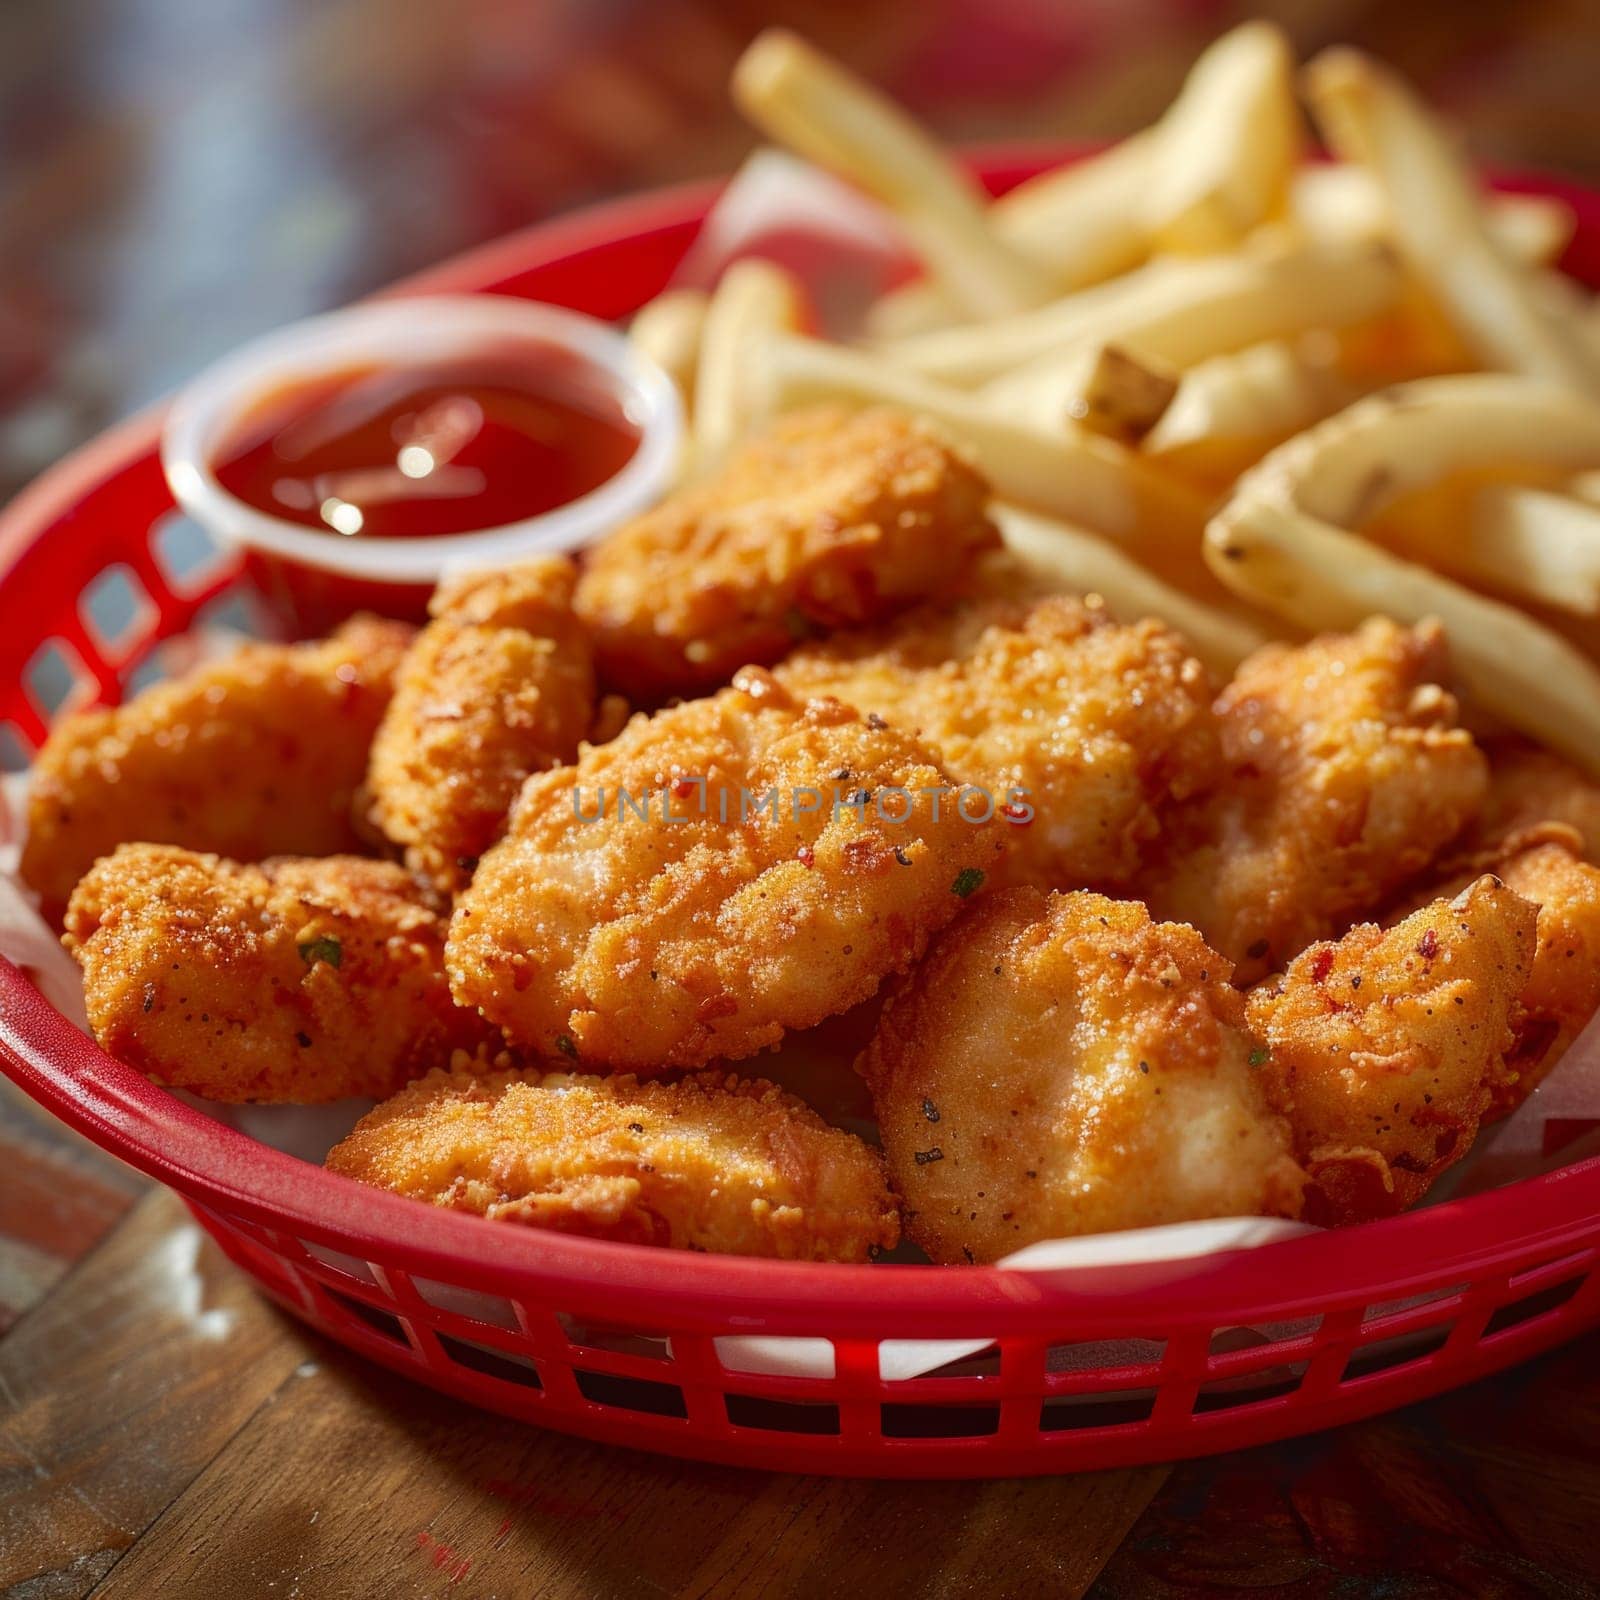 Close up of a basket of fried chicken and french fries.